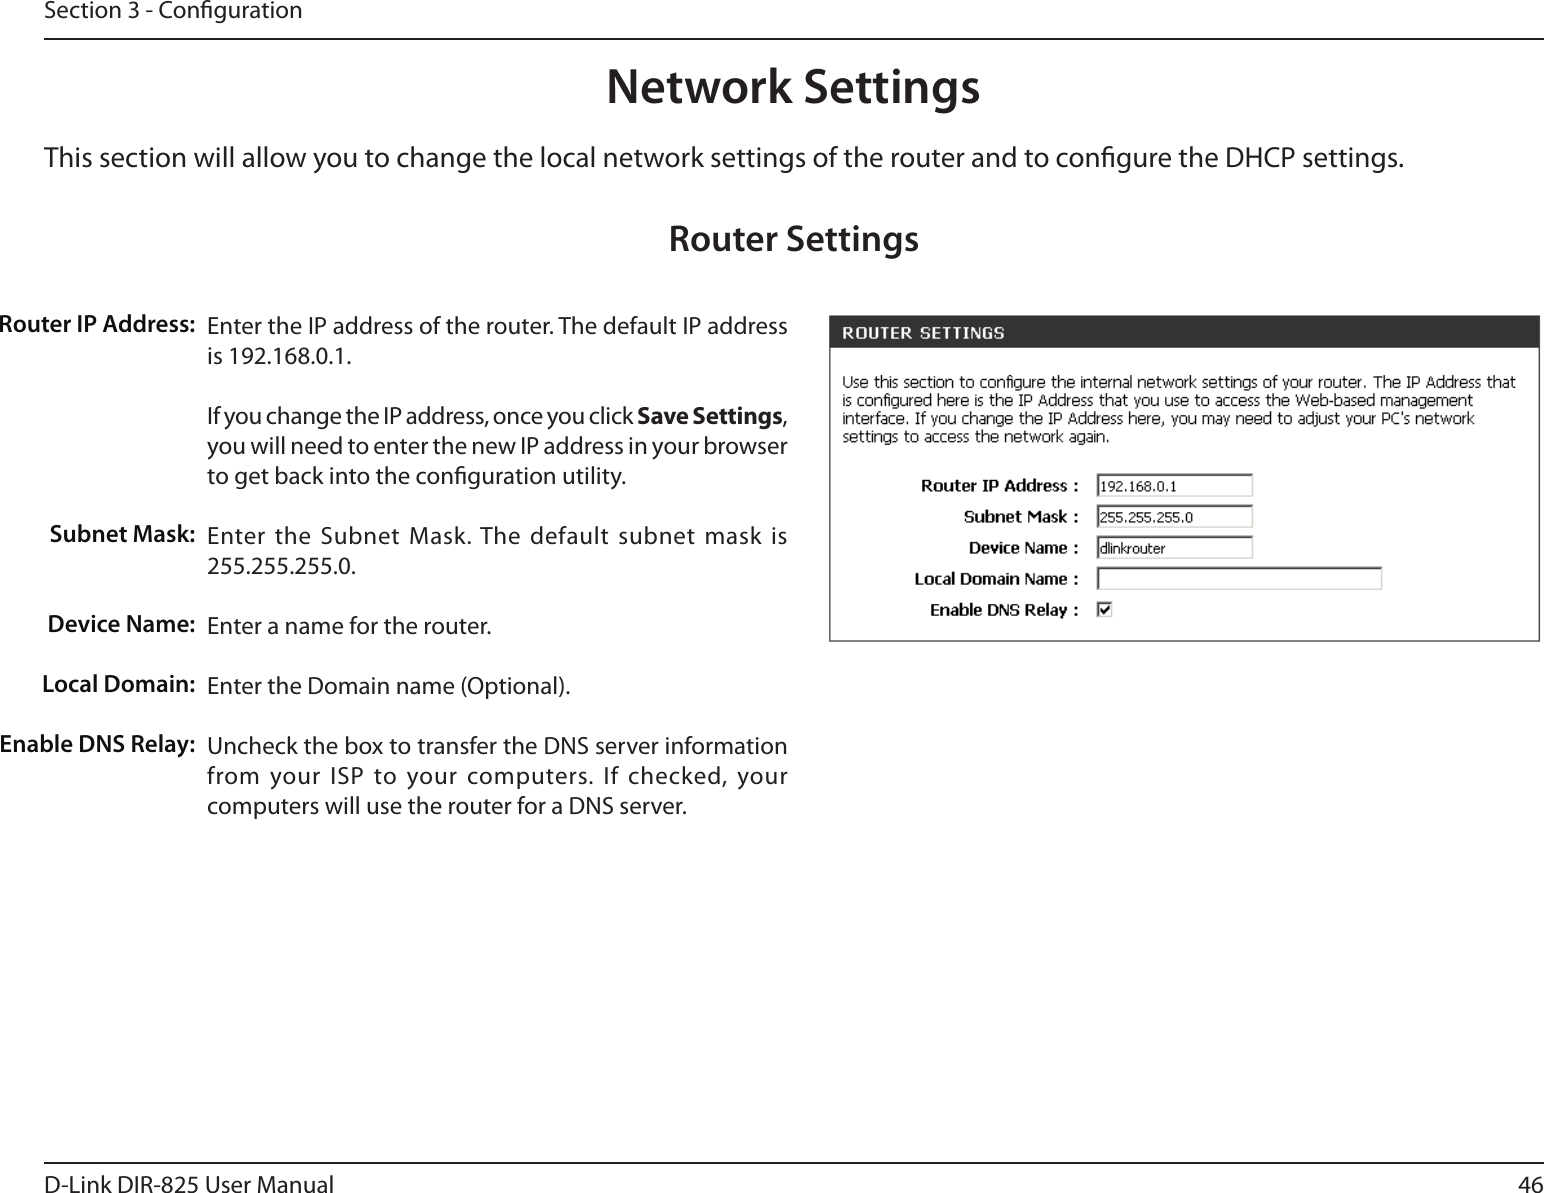 46D-Link DIR-825 User ManualSection 3 - CongurationThis section will allow you to change the local network settings of the router and to congure the DHCP settings.Network SettingsEnter the IP address of the router. The default IP address is 192.168.0.1.If you change the IP address, once you click Save Settings, you will need to enter the new IP address in your browser to get back into the conguration utility.Enter the Subnet  Mask. The default subnet mask  is 255.255.255.0.Enter a name for the router.Enter the Domain name (Optional).Uncheck the box to transfer the DNS server information from your ISP to your computers. If checked, your computers will use the router for a DNS server.Router IP Address:Subnet Mask:Device Name:Local Domain:Enable DNS Relay:Router Settings